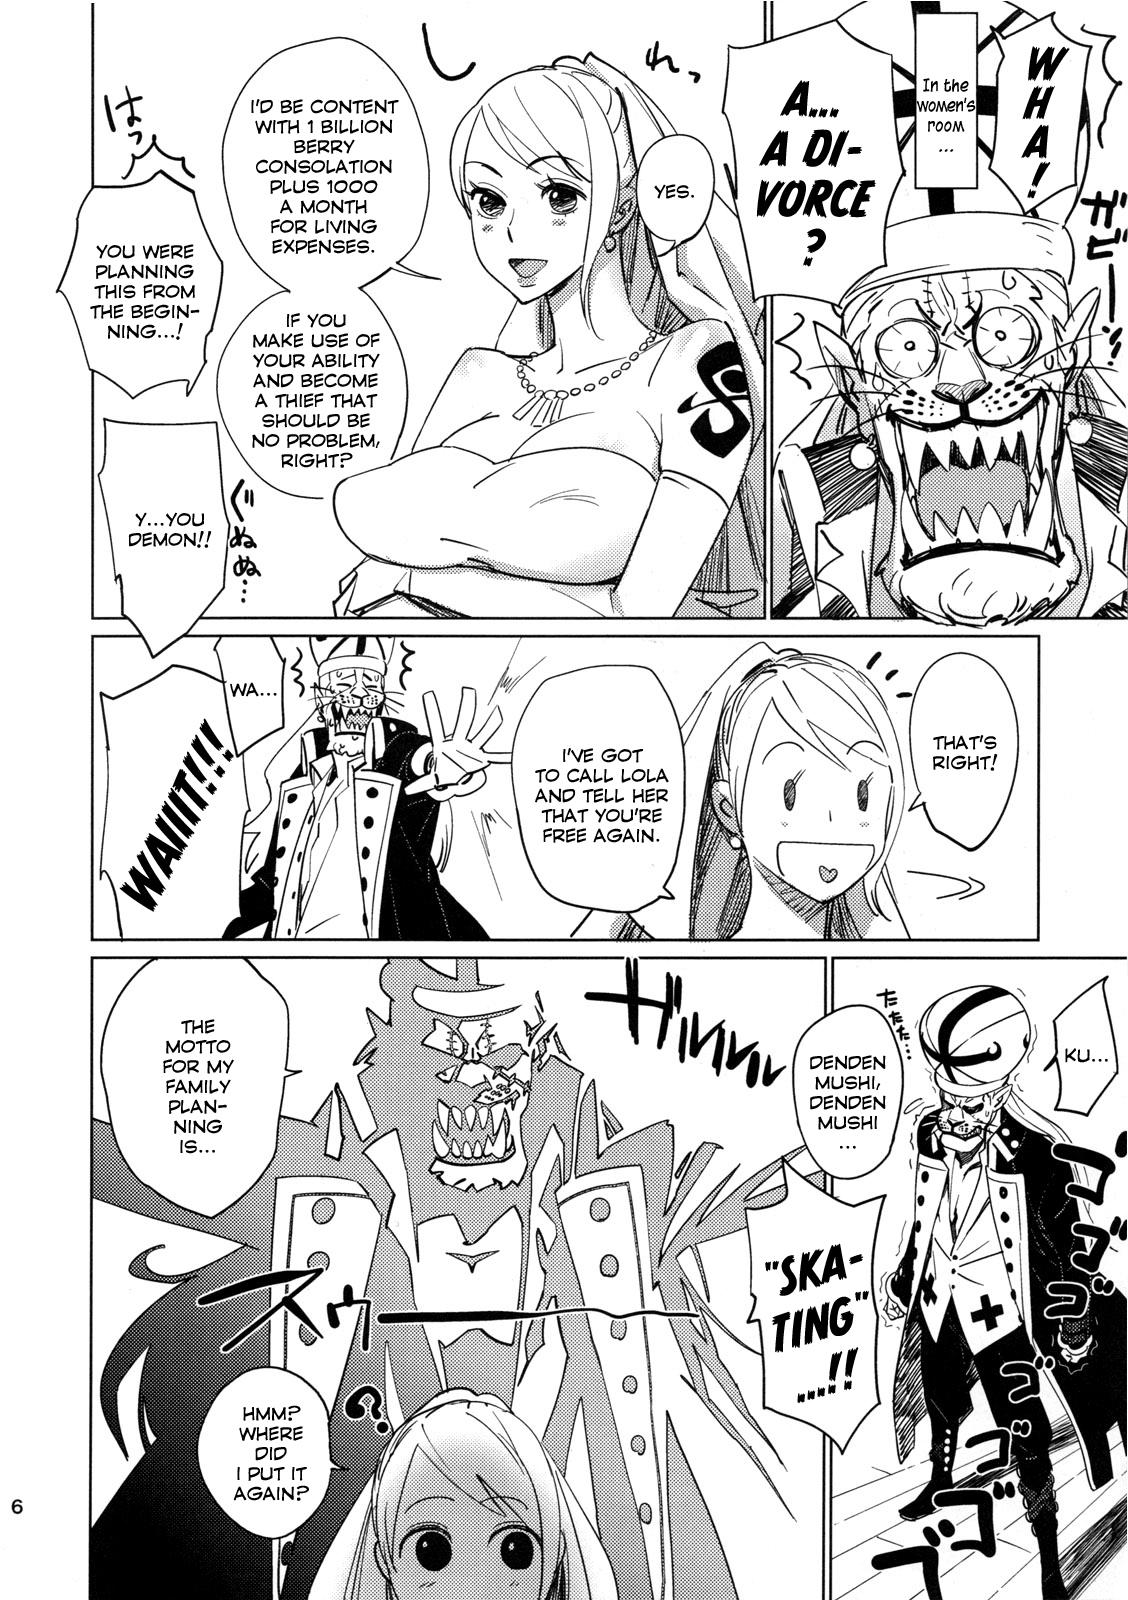 Oldyoung Shinsekai - One piece Whores - Page 5